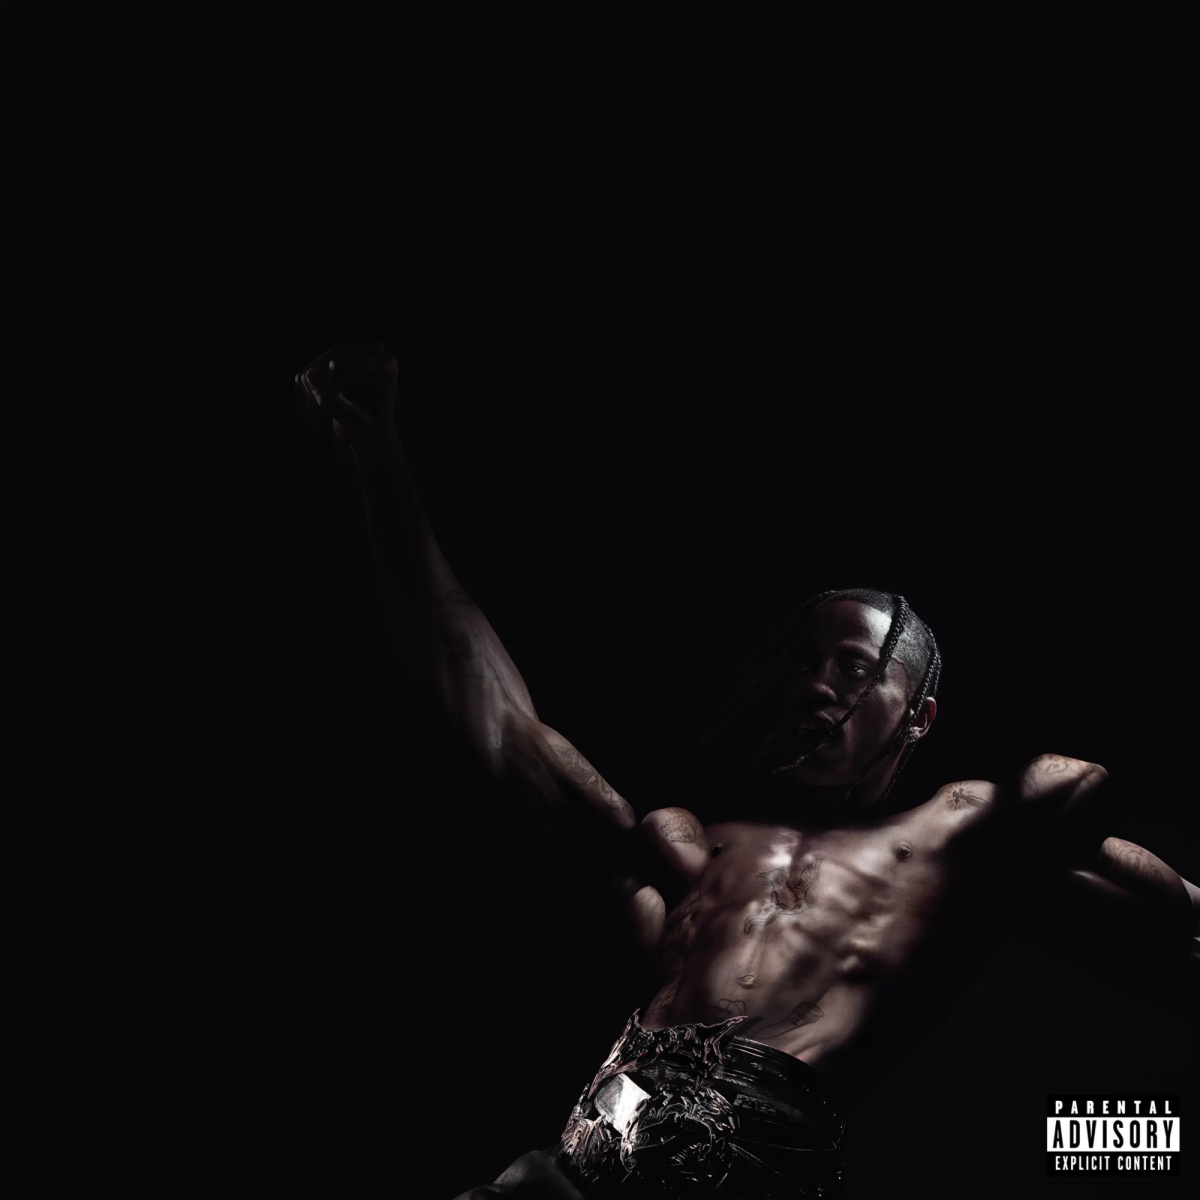 The cover for UTOPIA went through numerous revisions, but the current version features Travis Scott against a black backdrop falling backwards. It is reminiscent of the original cover for Rodeo, Travis Scotts first album. (Photo credit: rateyourmusic.com)